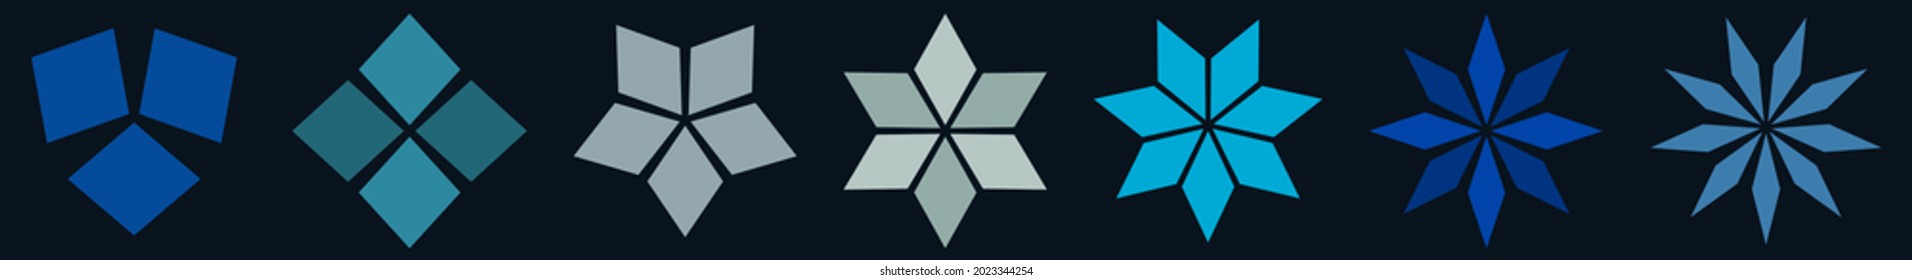 Rhomb or diamond like shapes arranged around centre, forming objects similar to snowflake. Version with different number of points